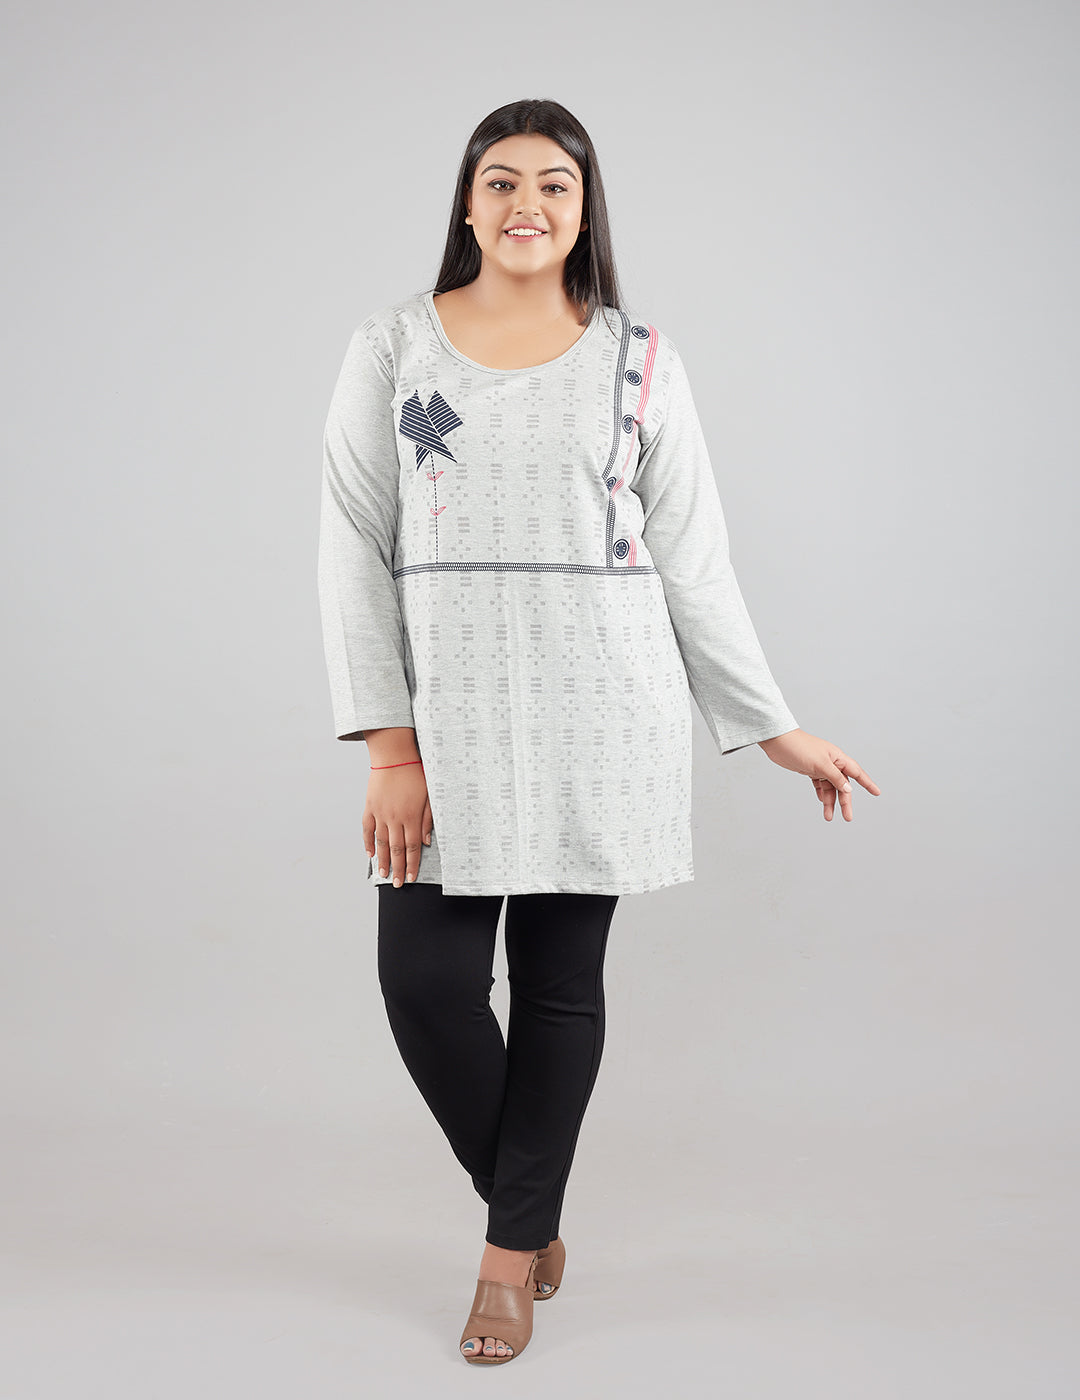 Plus Size Printed Long Tops For Women Full Sleeves T-shirts - Grey